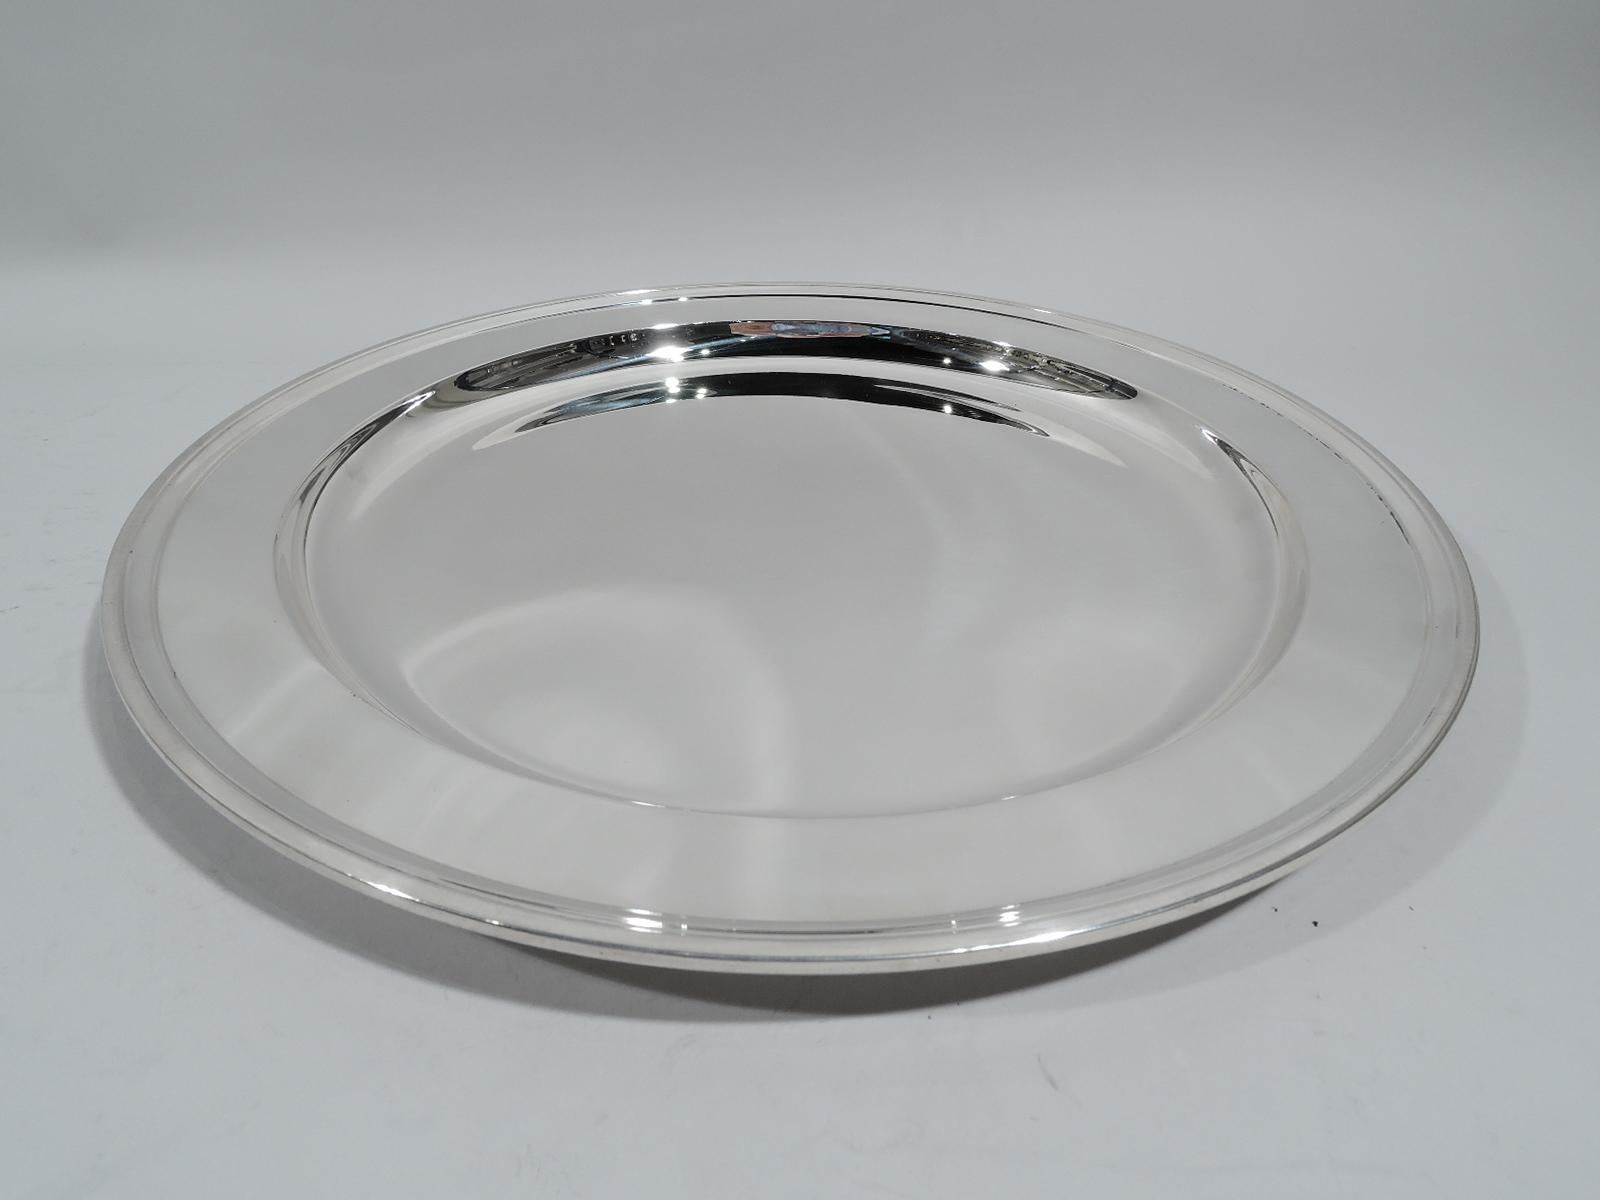 Modern sterling silver tray. Made by Tiffany & Co. in New York, ca 1923. Deep well and wide shoulder. Fully marked including pattern no. 20188 (first produced in 1923) and director's letter m. Heavy weight: 27.5 troy ounces.